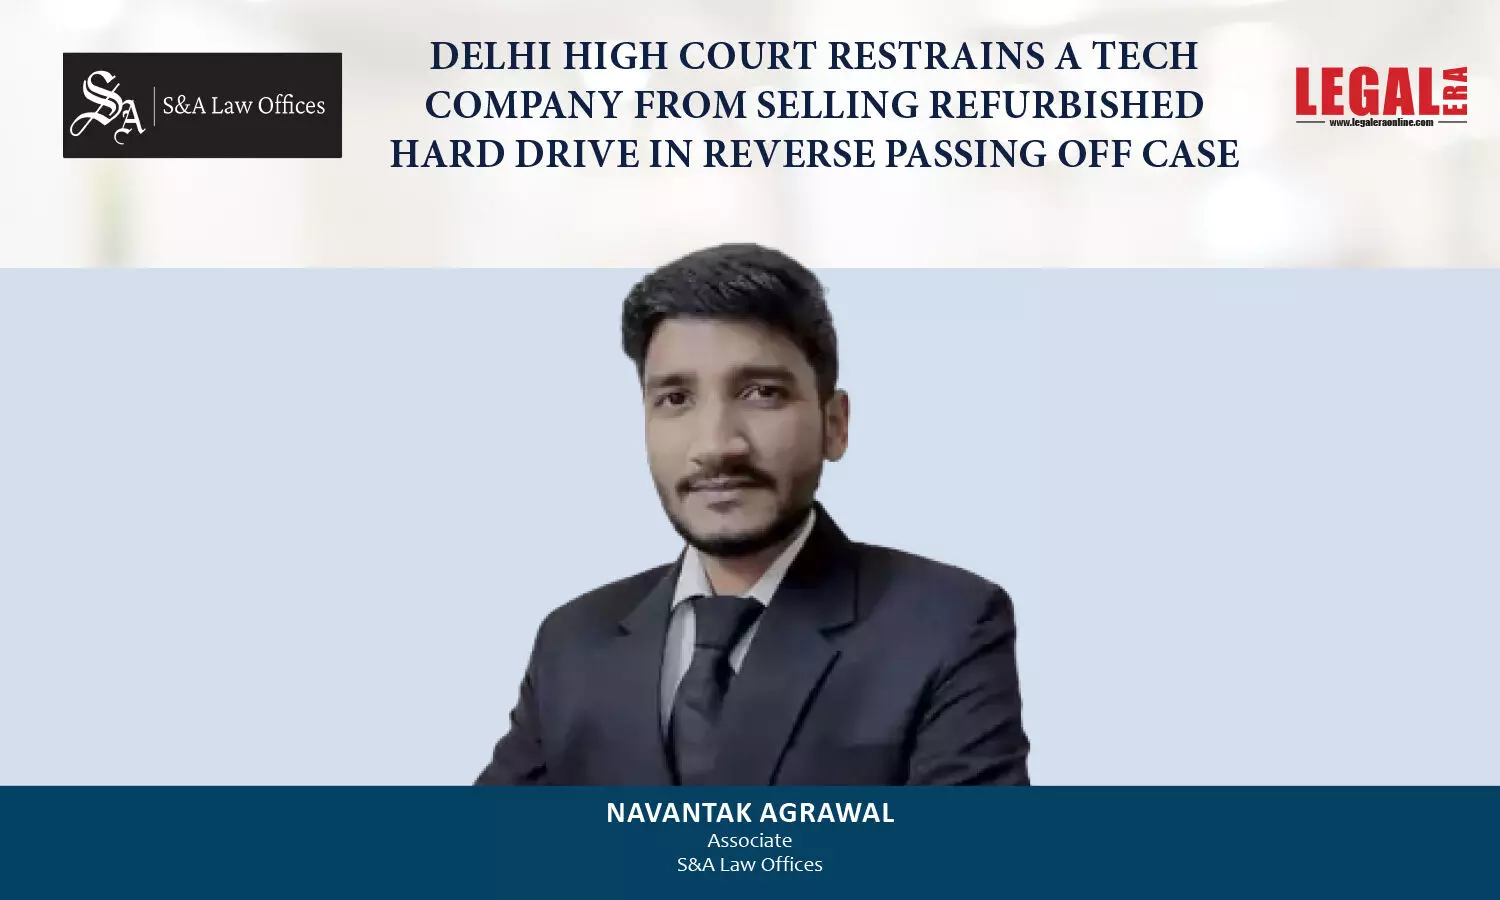 Delhi High Court Restrains A Tech Company From Selling Refurbished Hard Drive In Reverse Passing Off Case